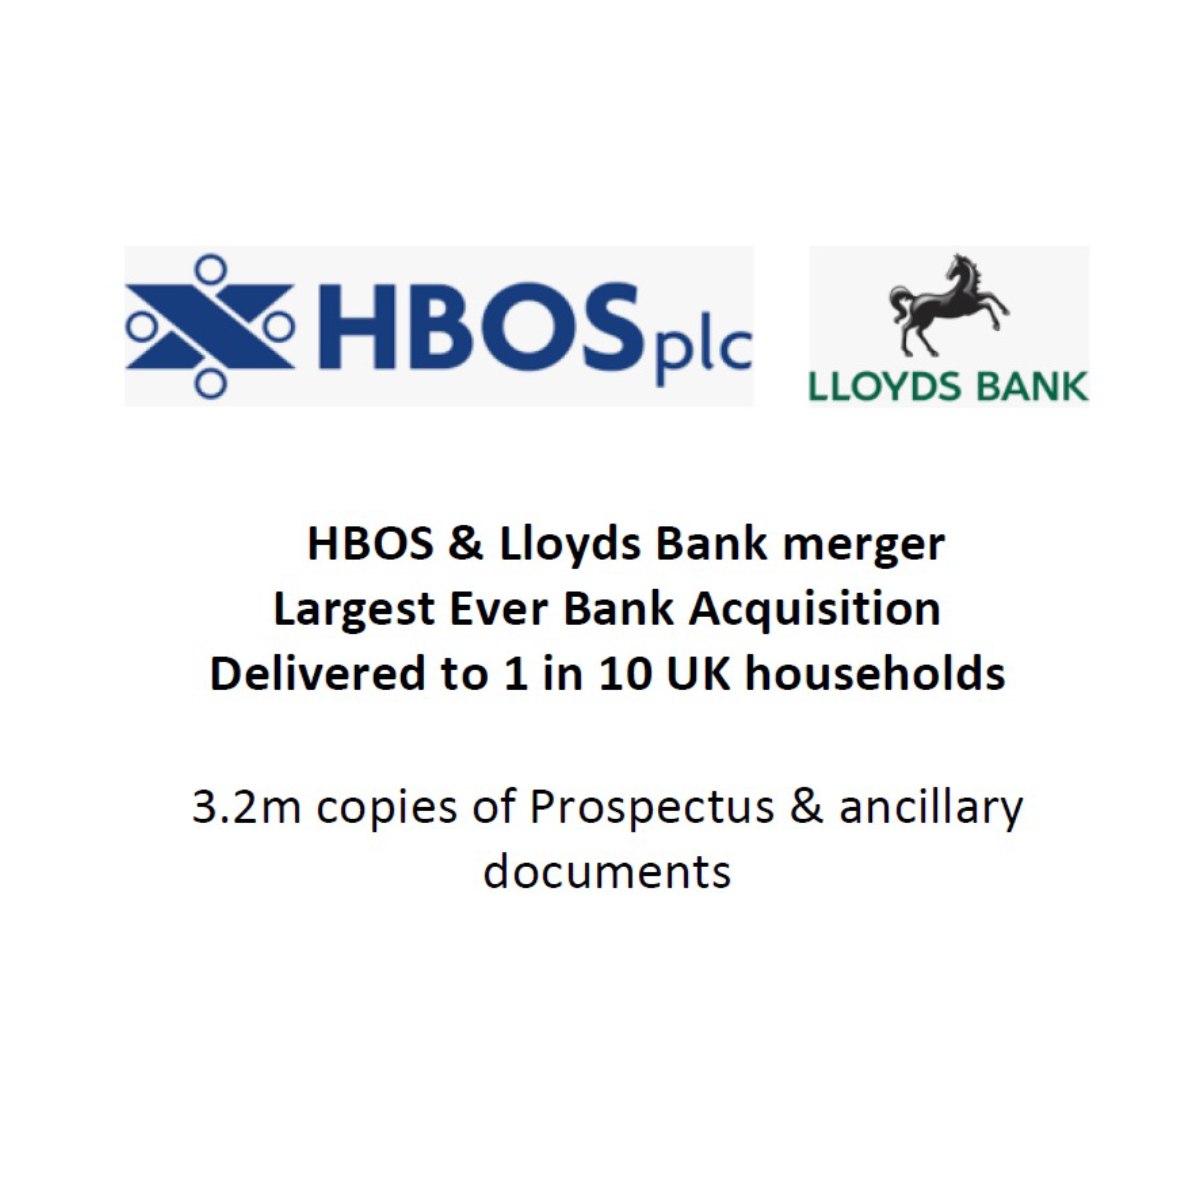 HBOS & Lloyds Bank merger Largest Ever Bank Acquisition Delivered to 1 in 10 UK households